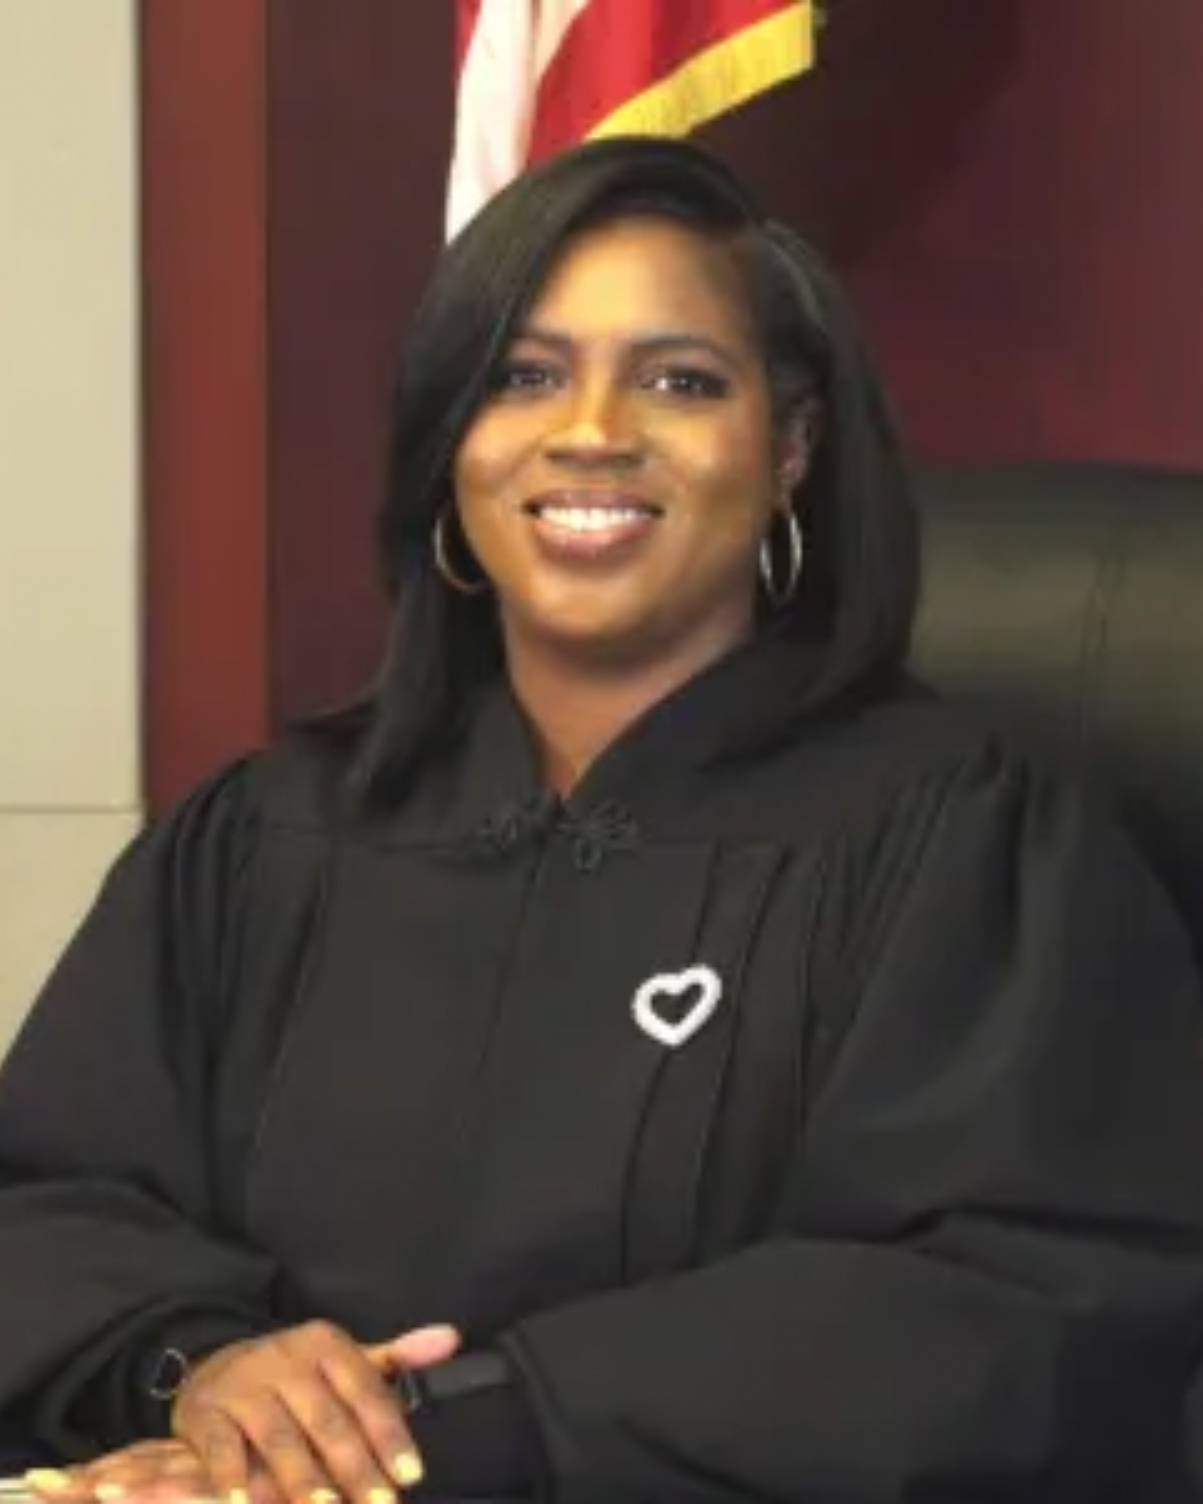 Judge Timika Lane for Judge of the Superior Court